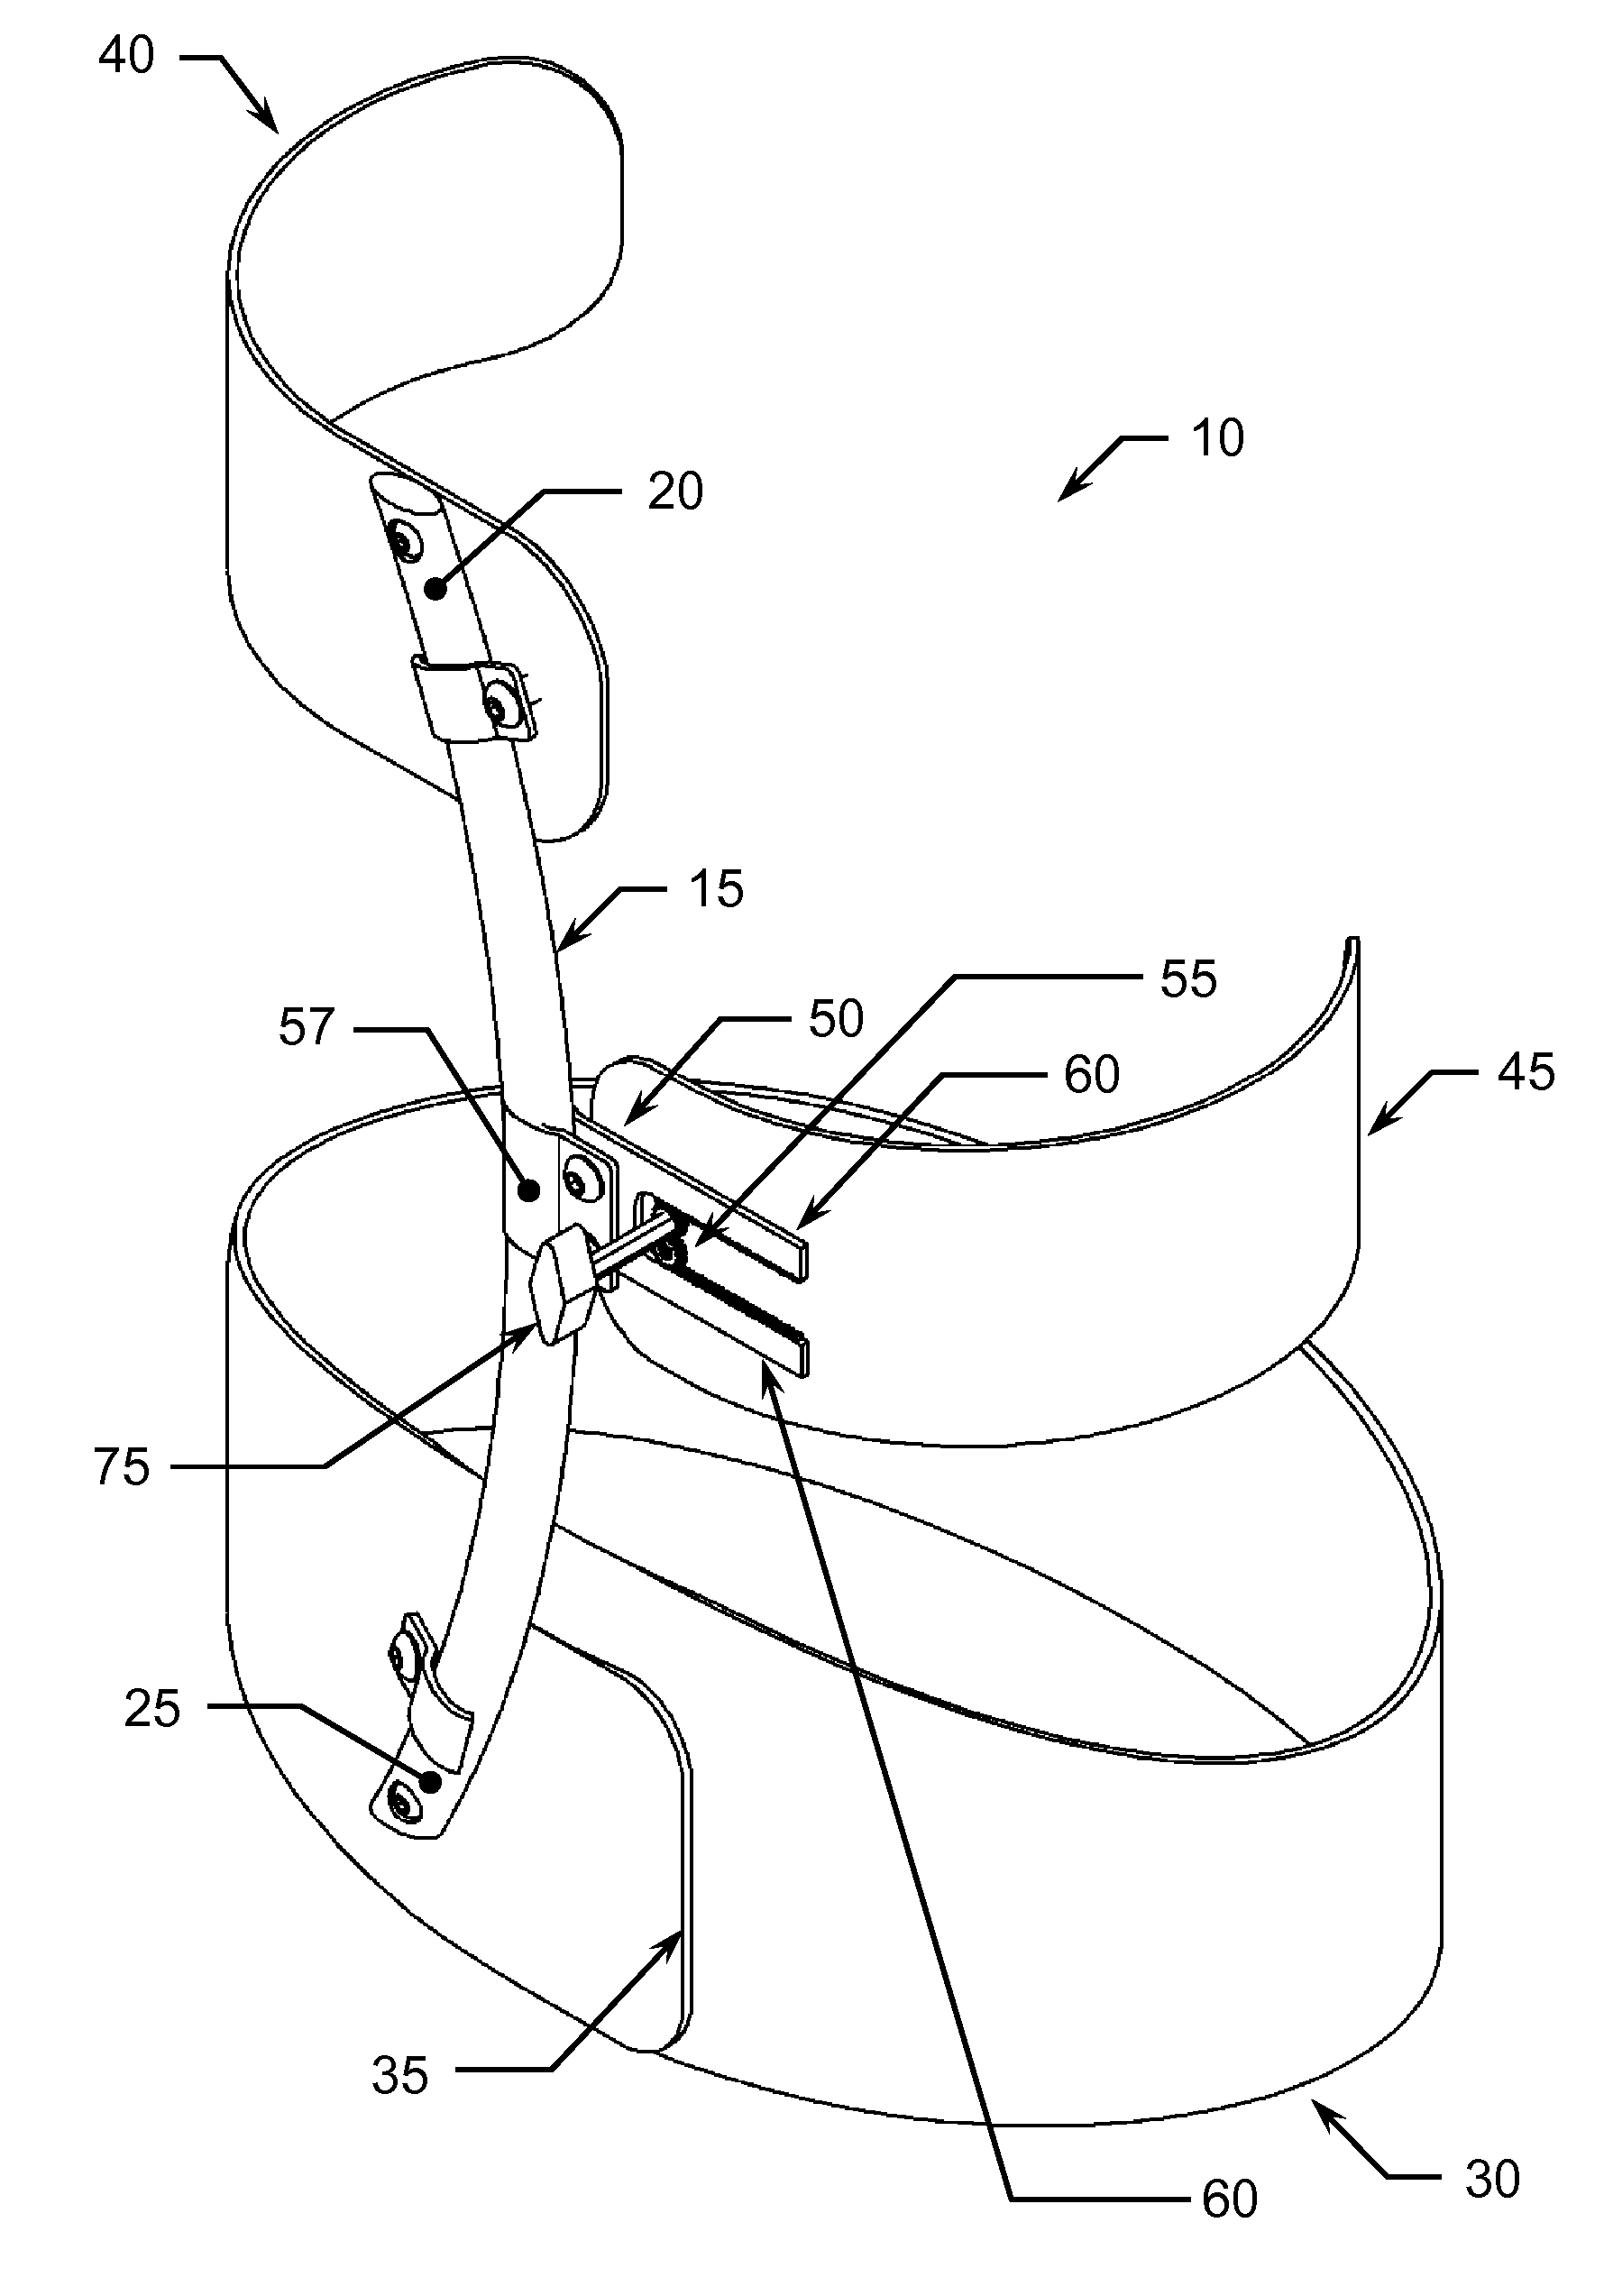 Method and Apparatus For Dynamic Scoliosis Orthosis